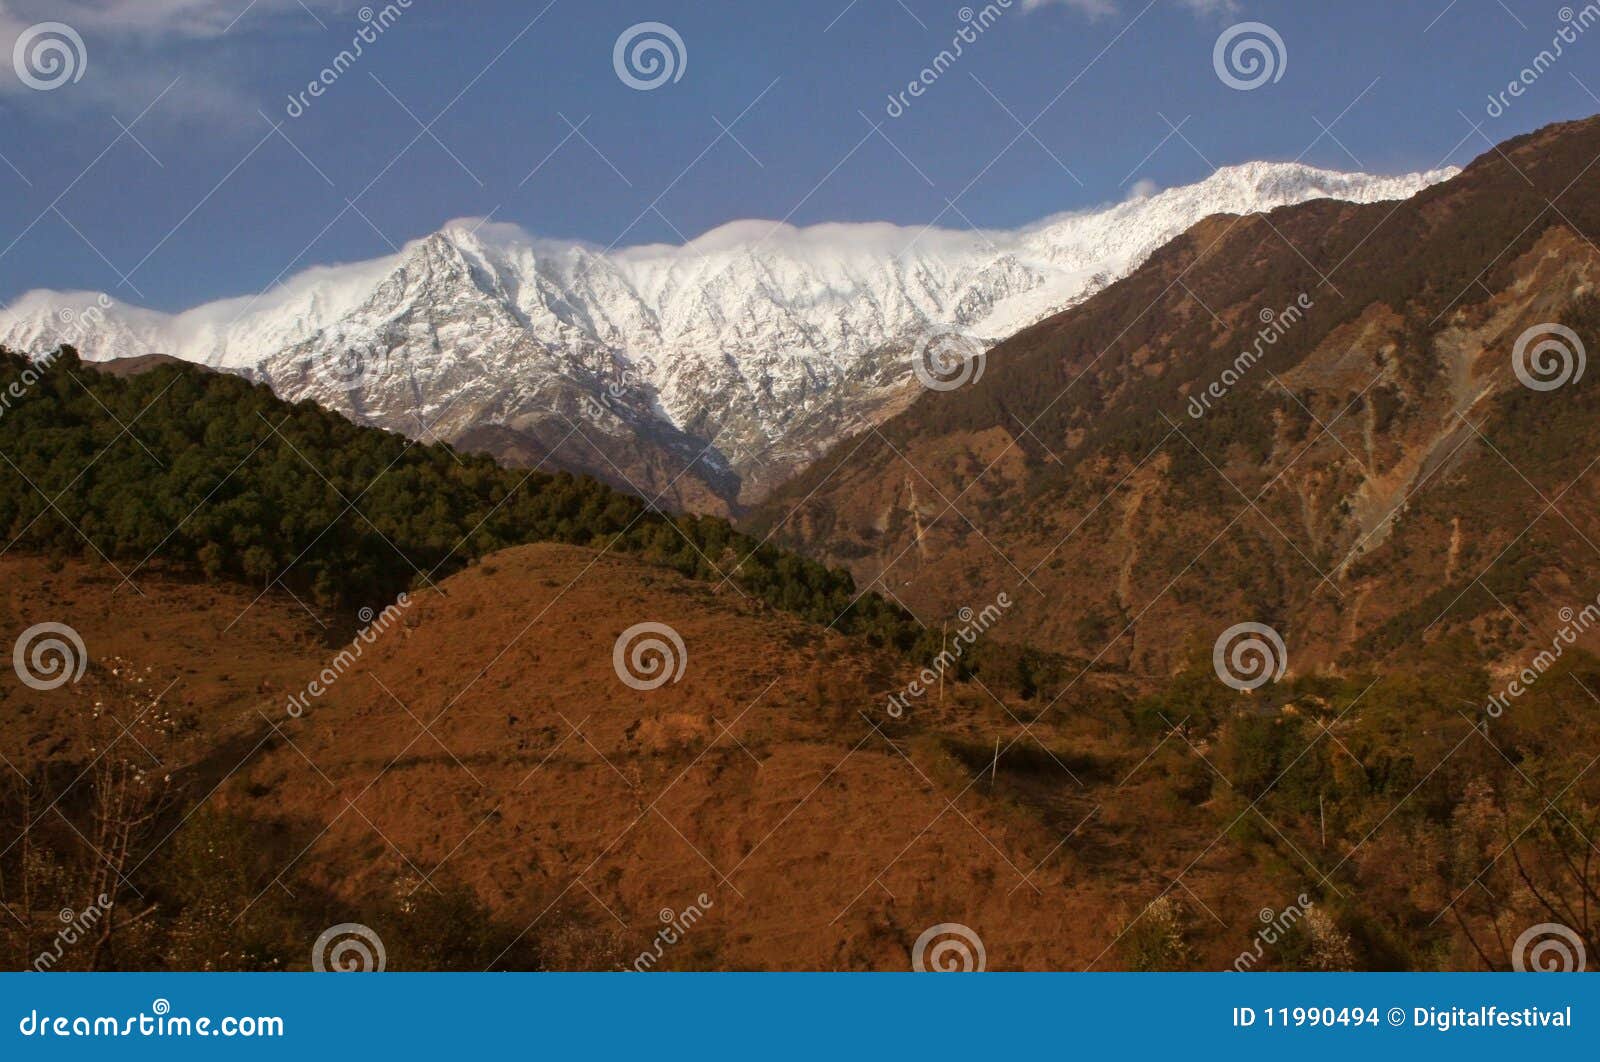 snow peaked himalayas and deforestation india